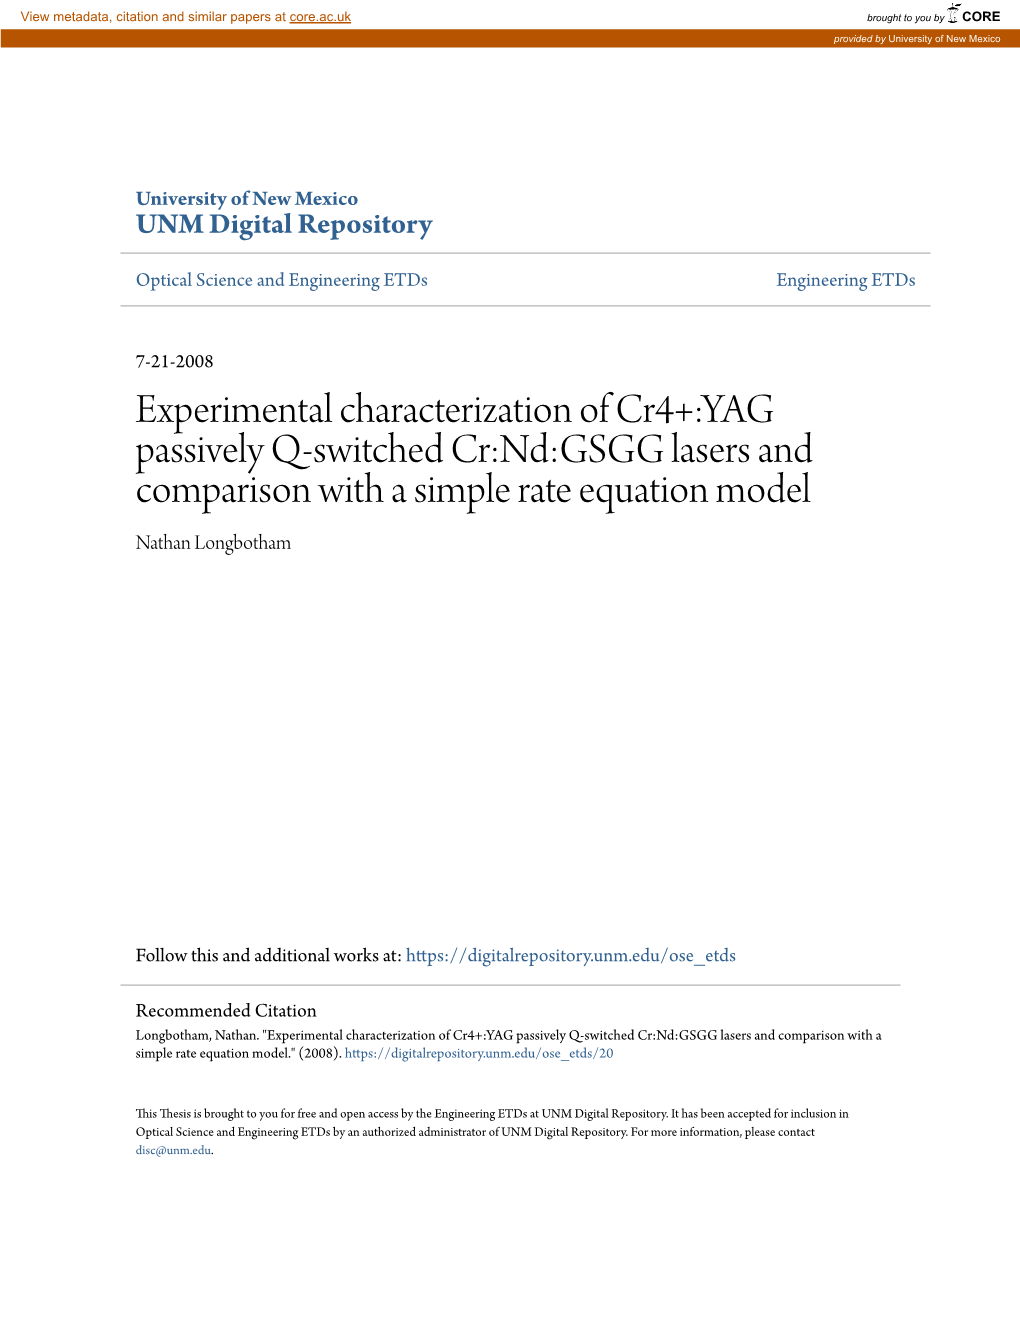 Experimental Characterization of Cr4+:YAG Passively Q-Switched Cr:Nd:GSGG Lasers and Comparison with a Simple Rate Equation Model Nathan Longbotham